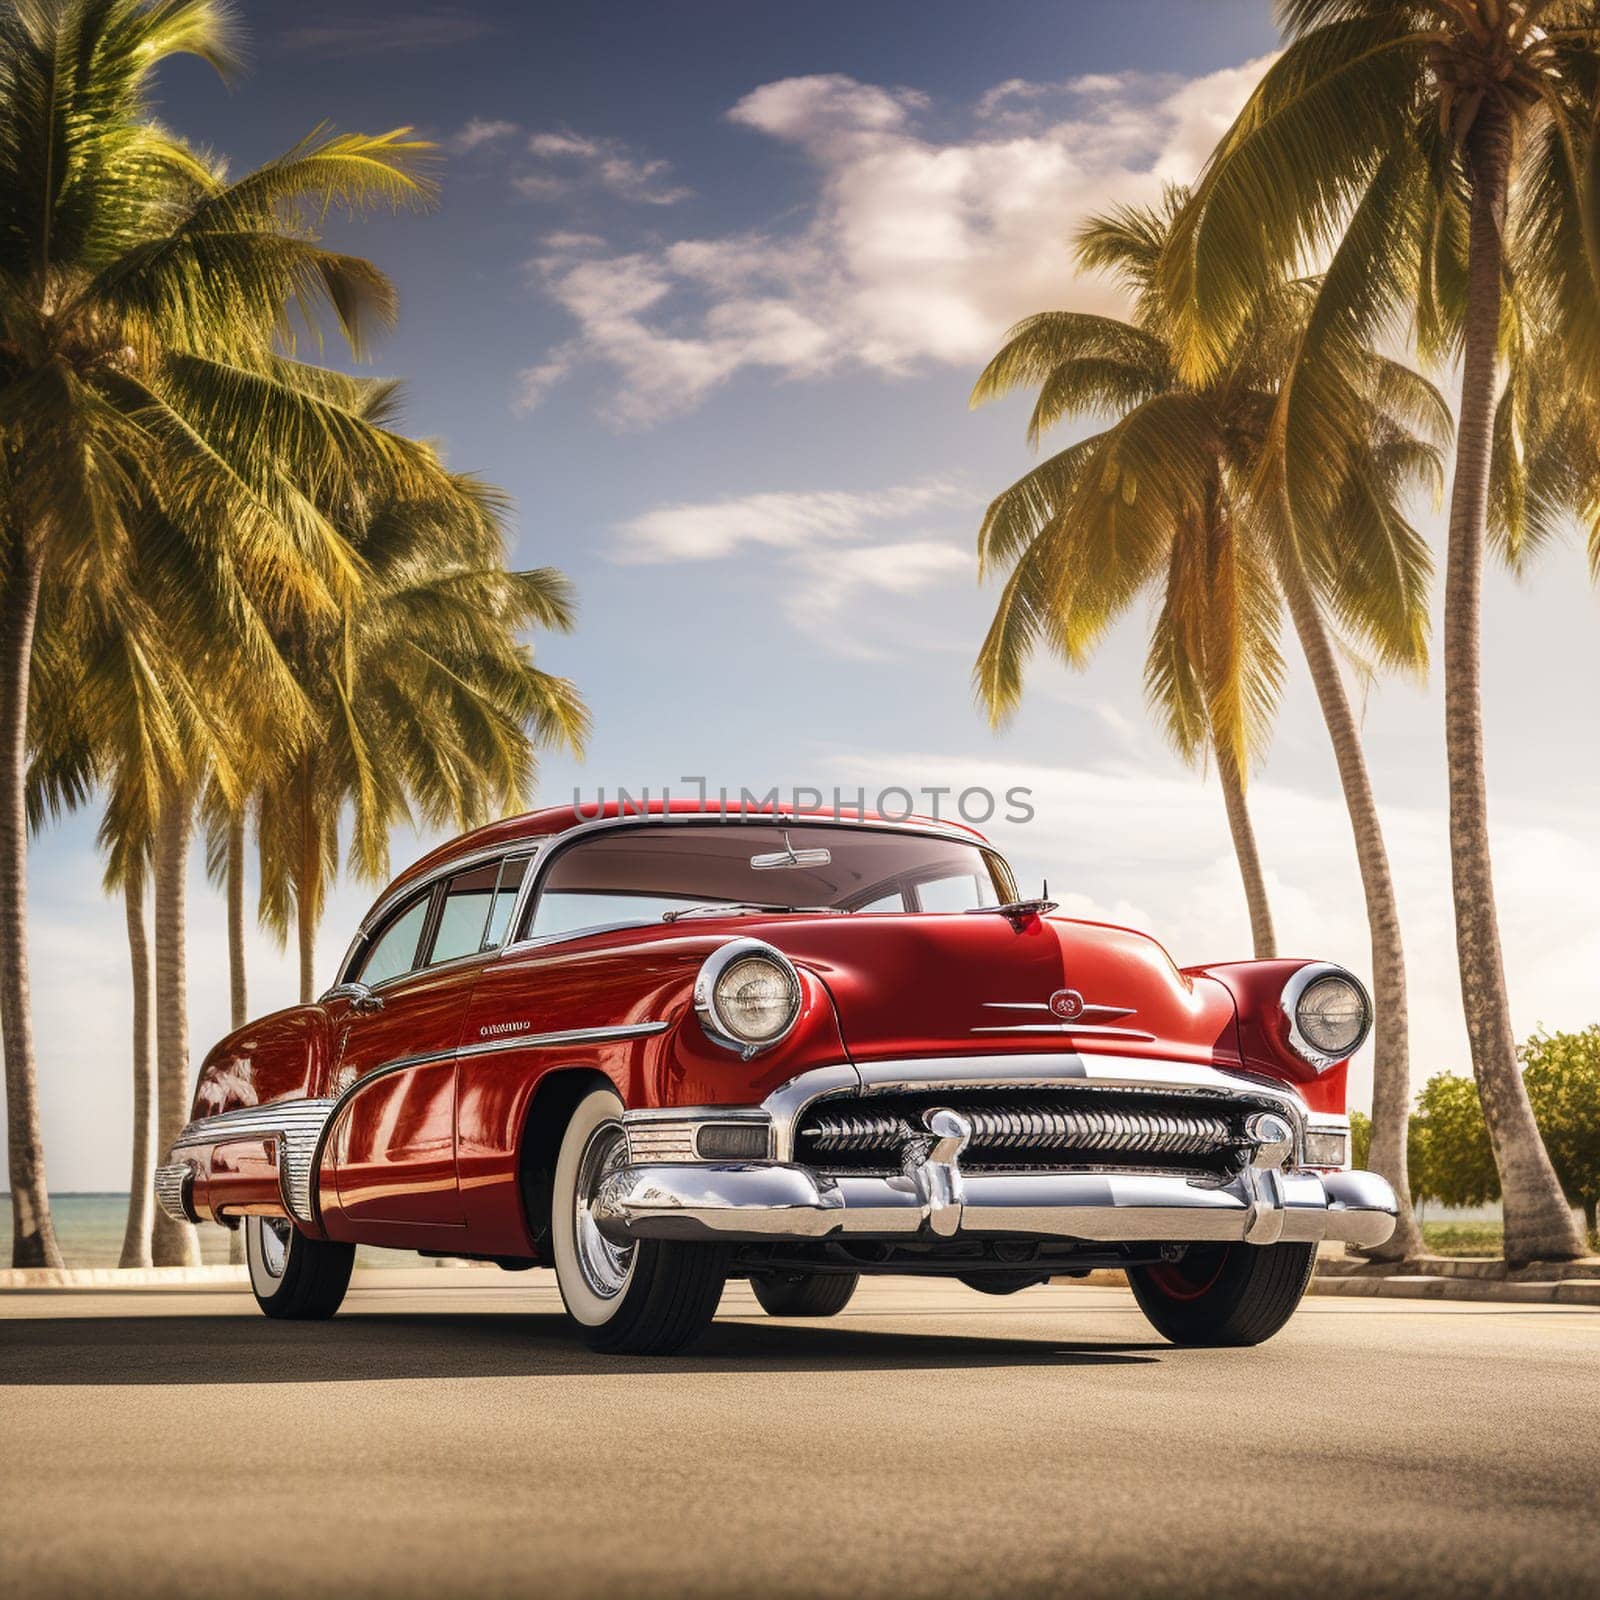 Immerse yourself in the timeless elegance of a grand vintage car straight out of the 1950s. Picture this classic automobile gliding along a sun-drenched coastal road, amidst vibrant palm trees and a serene ocean view. The car's polished chrome accents glisten under the warm sunlight, while its glossy candy apple red exterior embodies the epitome of luxury. The driver, adorned in dapper attire, proudly navigates the winding road with a confident smile. Let this retro-inspired art style beautifully accentuate the nostalgic charm of these vintage cars and transport you to an era of vintage car luxury.